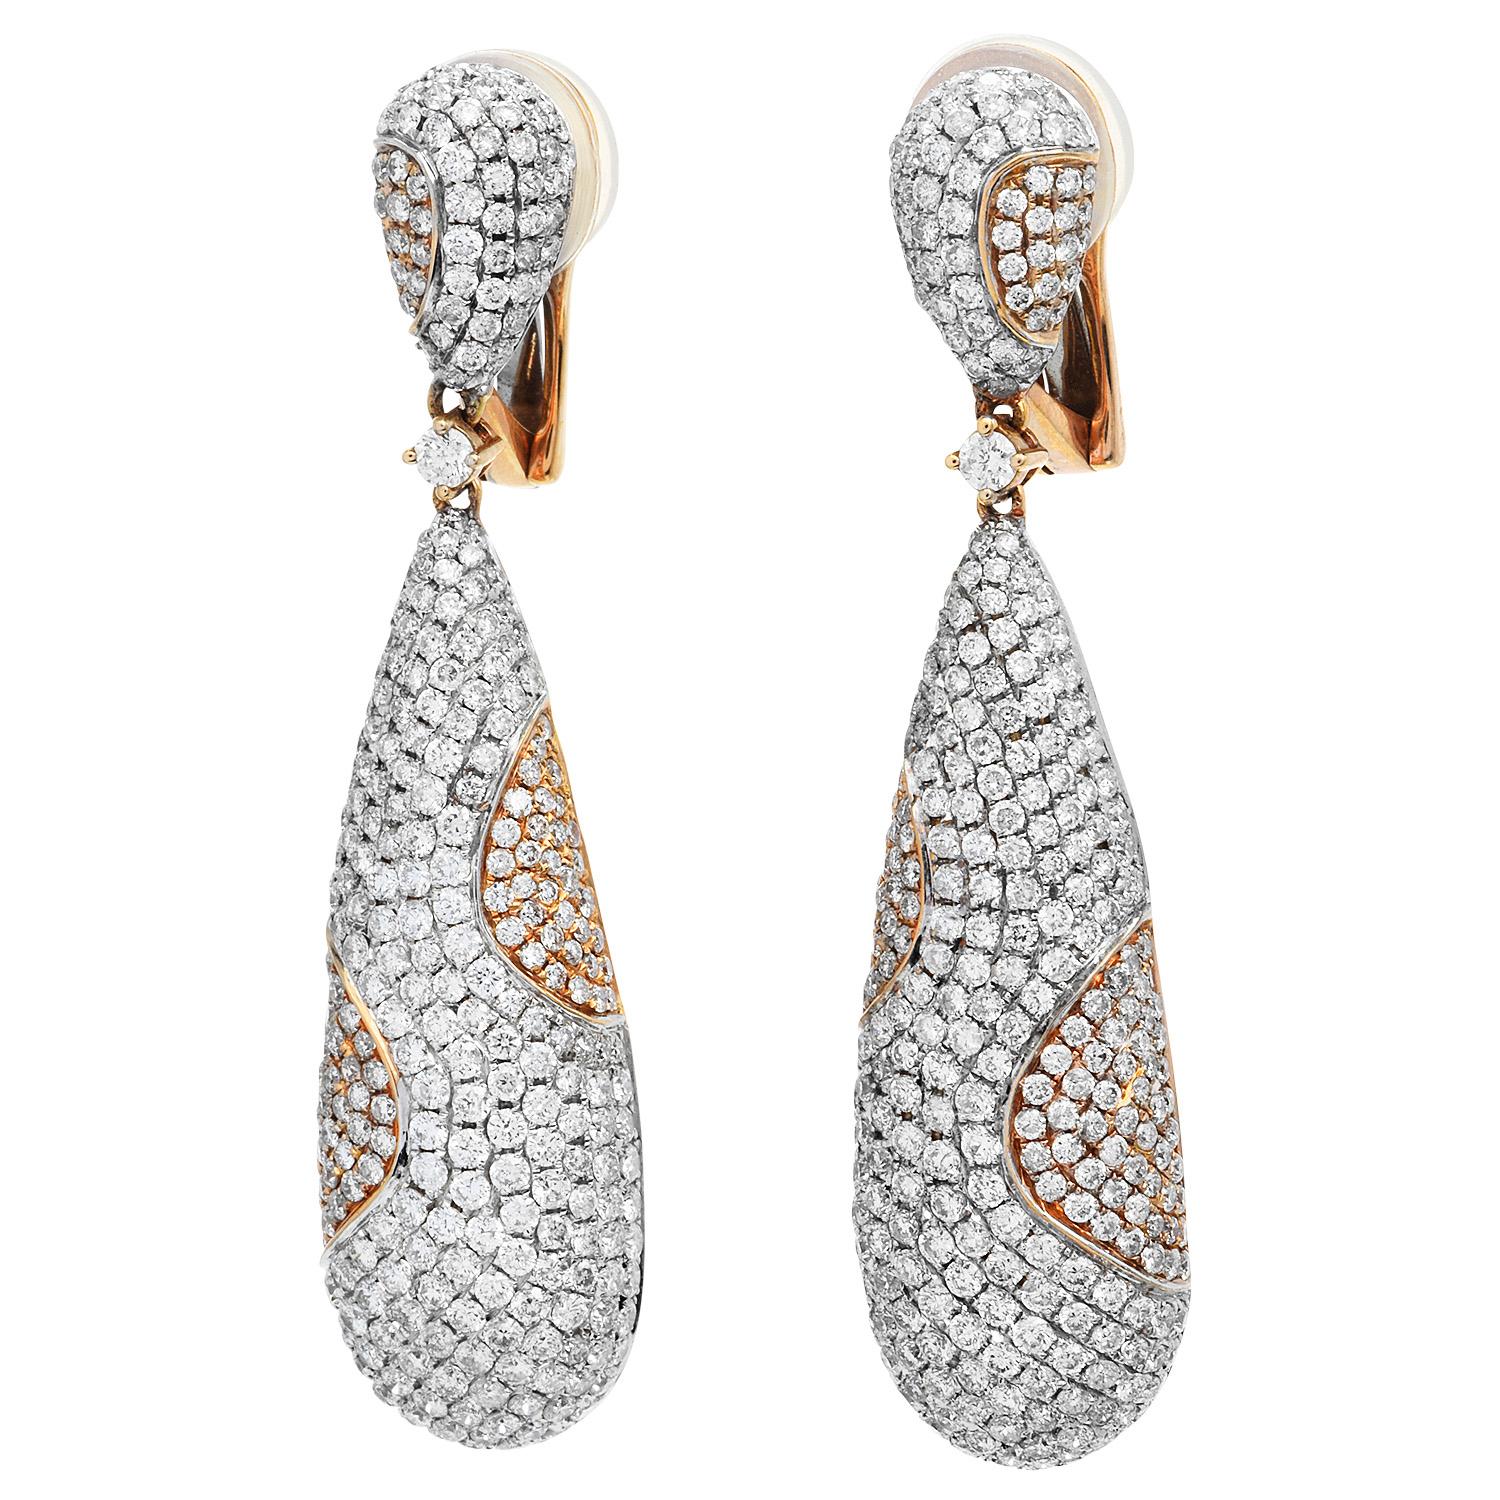 These dangle drop earrings have a very contemporary & modern feel,

These 18k white and rose gold earrings have an elongated drop shape that combines multi-tone gold.

Set across the whole piece with 500 genuine round cut diamonds, weighing approx.